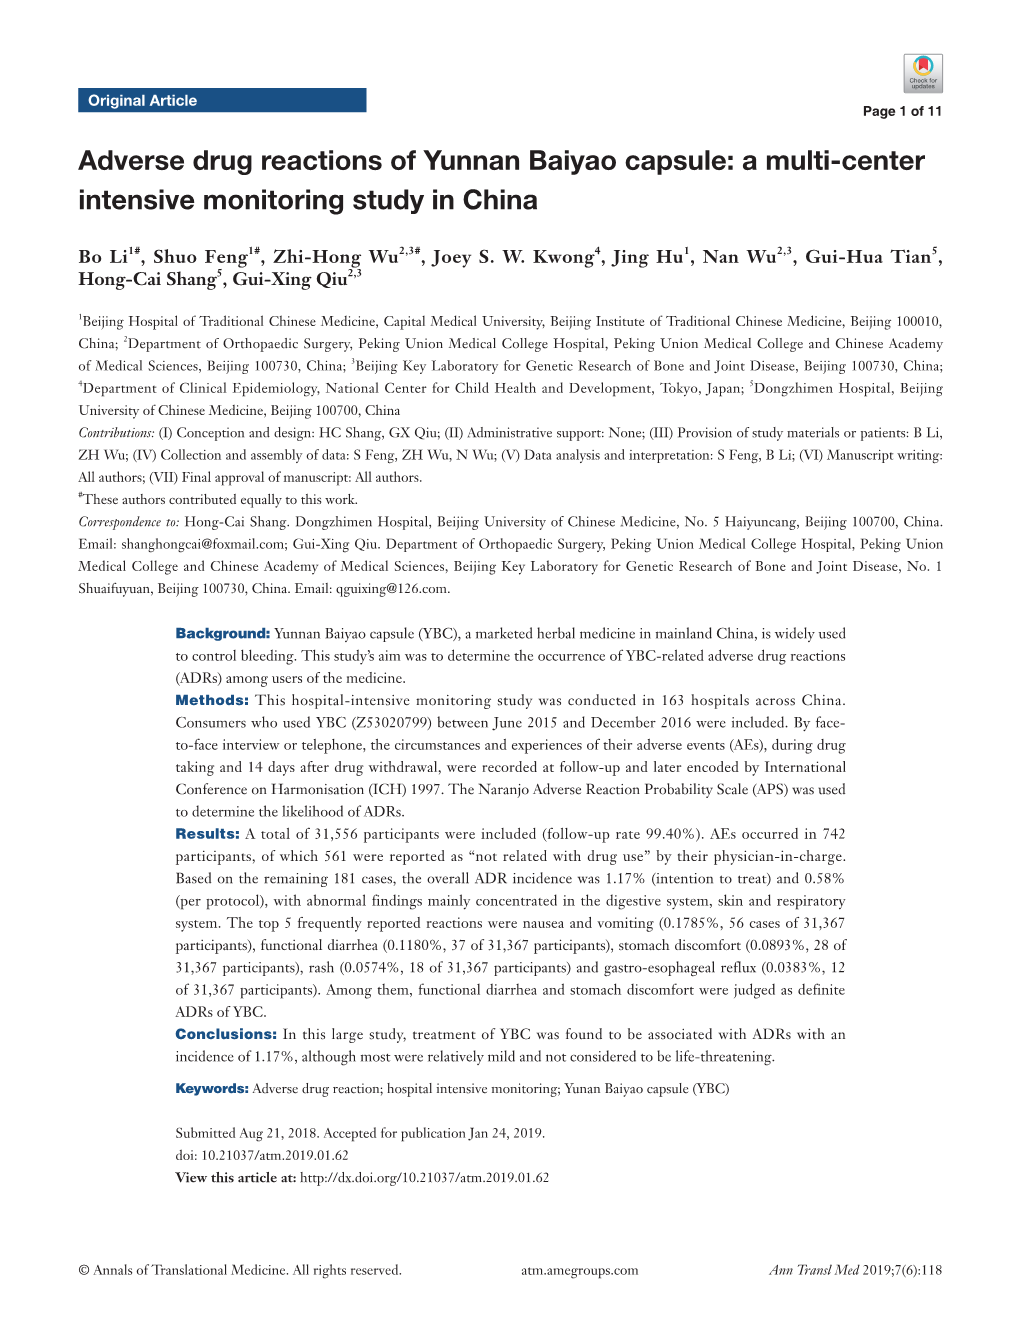 Adverse Drug Reactions of Yunnan Baiyao Capsule: a Multi-Center Intensive Monitoring Study in China